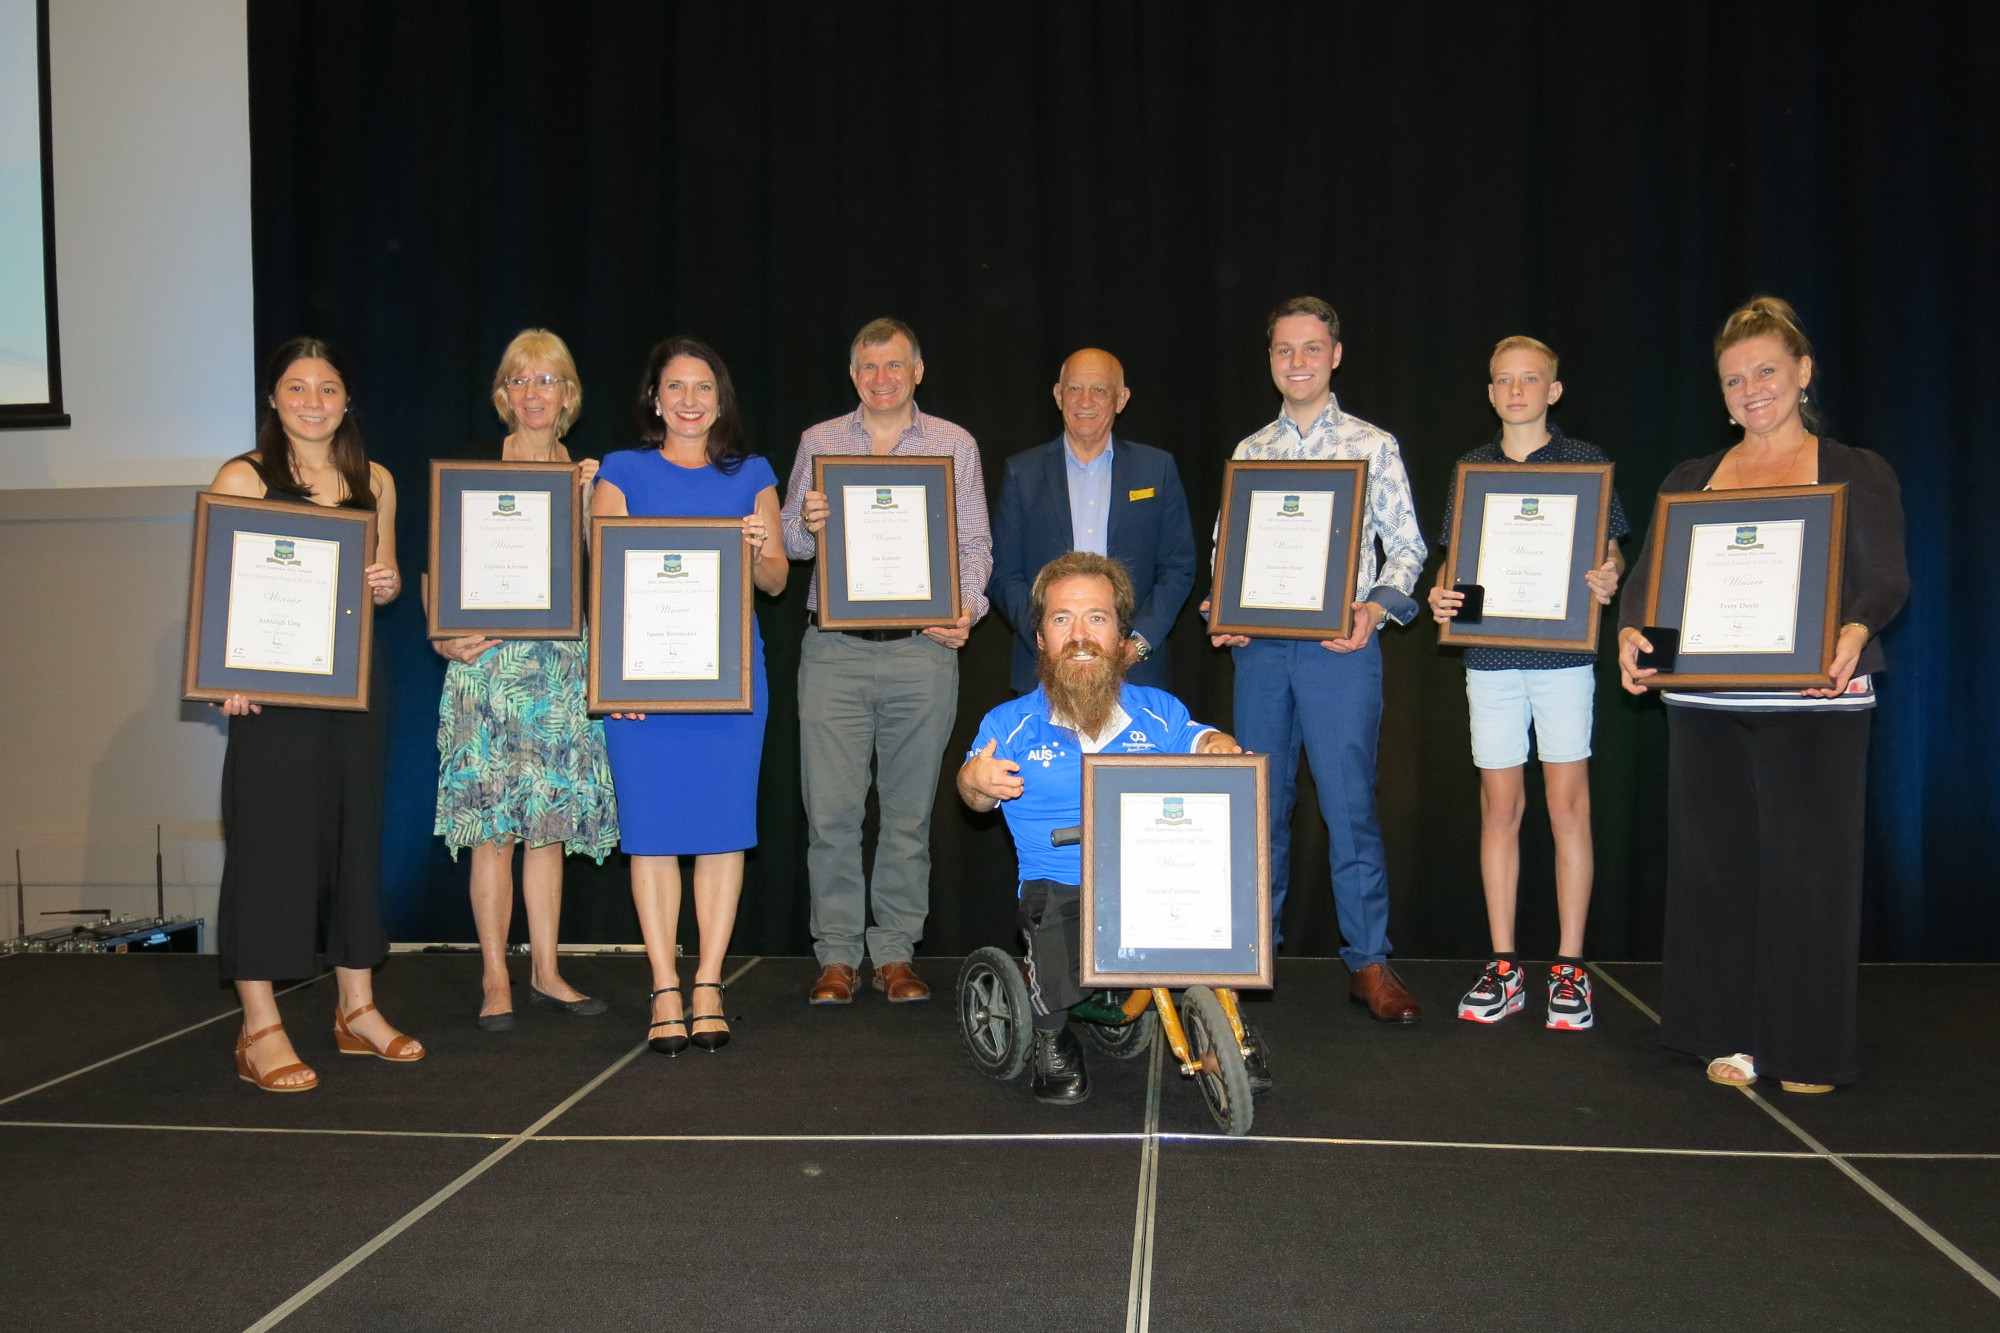 Mayor Bob Manning (back centre) with Australia Day Award recipients (from left) Ashleigh Ung, Glynnis Kiernan, Janine Bowmaker, Ian Roberts, Grant “Scooter” Patterson, Harrison Oates, Caleb Nissen, and Rachel Bradley (on behalf of Terry Doyle). Photo by Tanya Murphy.